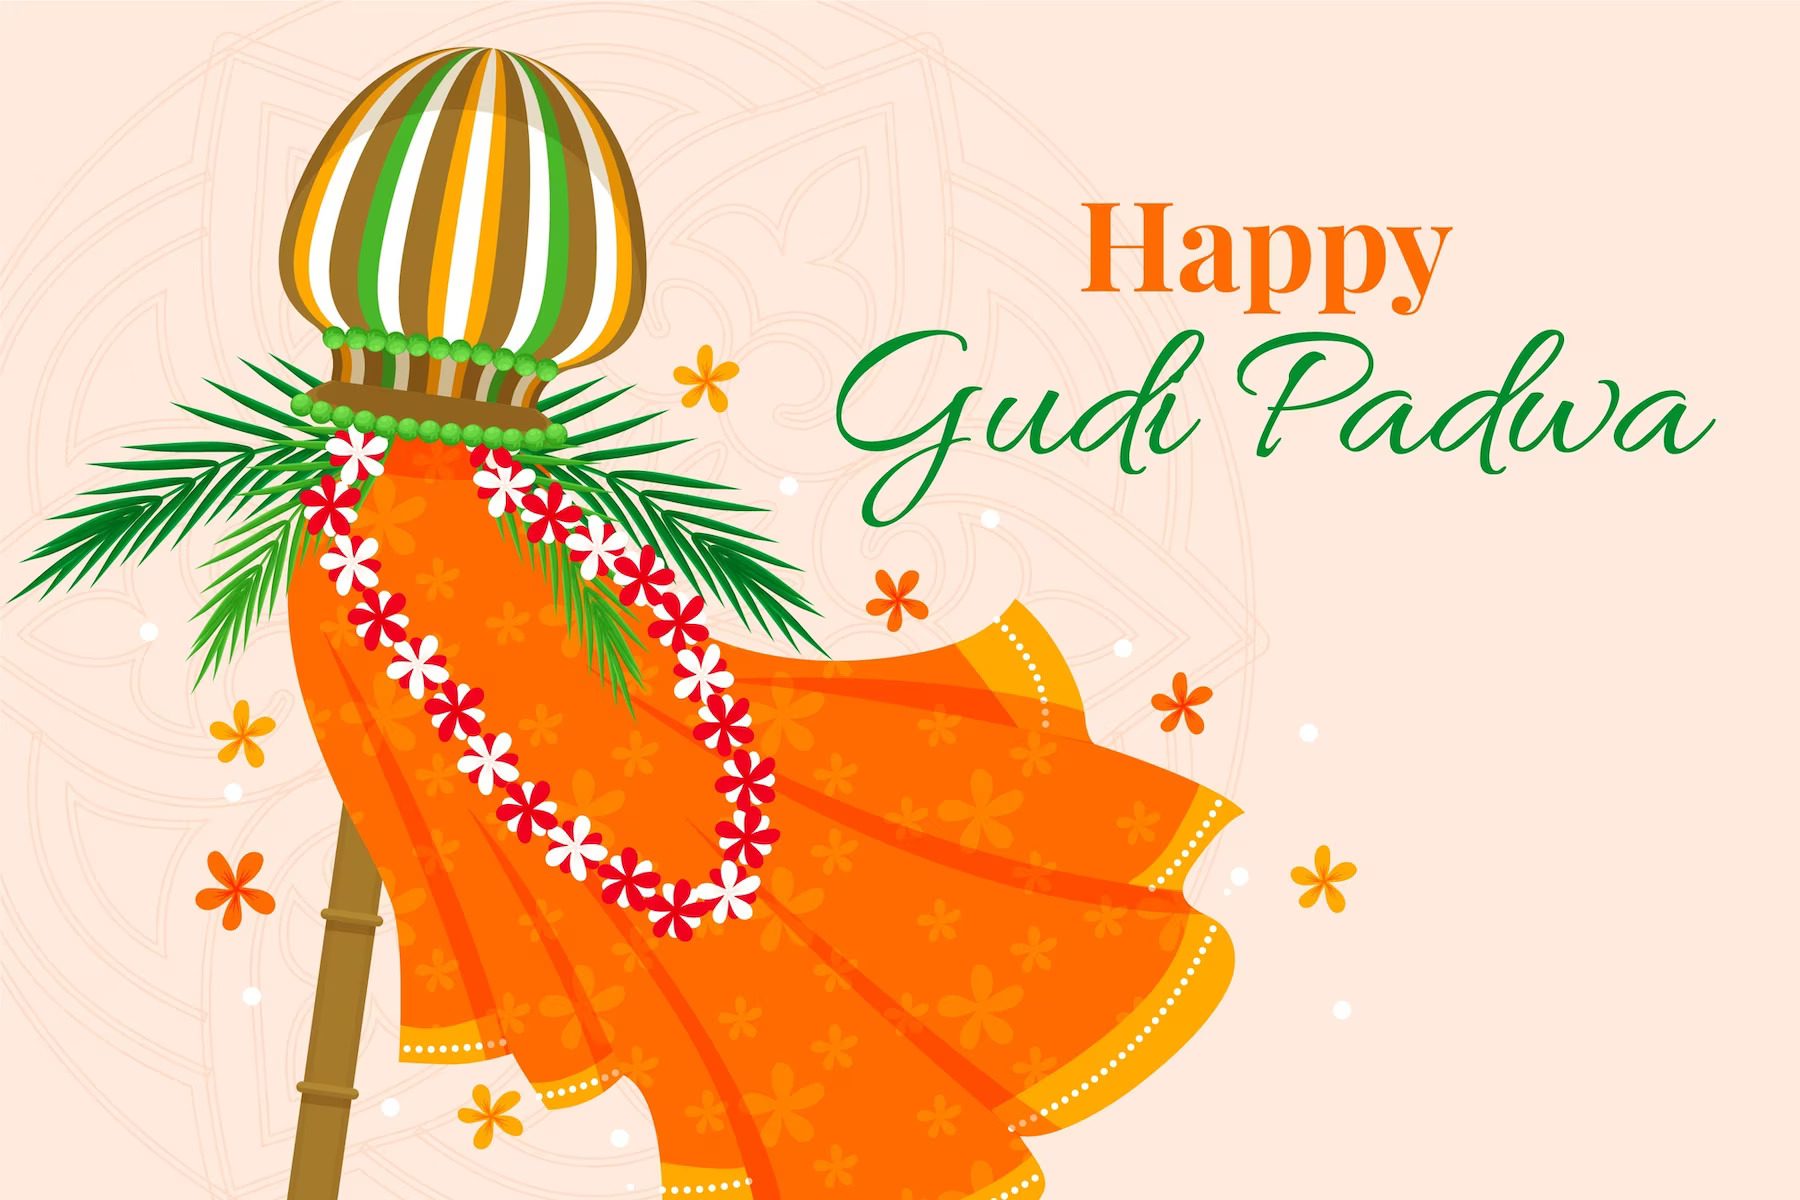 Happy Gudi Padwa 2023 Wishes Greetings, Best Quotes, Messages, Images